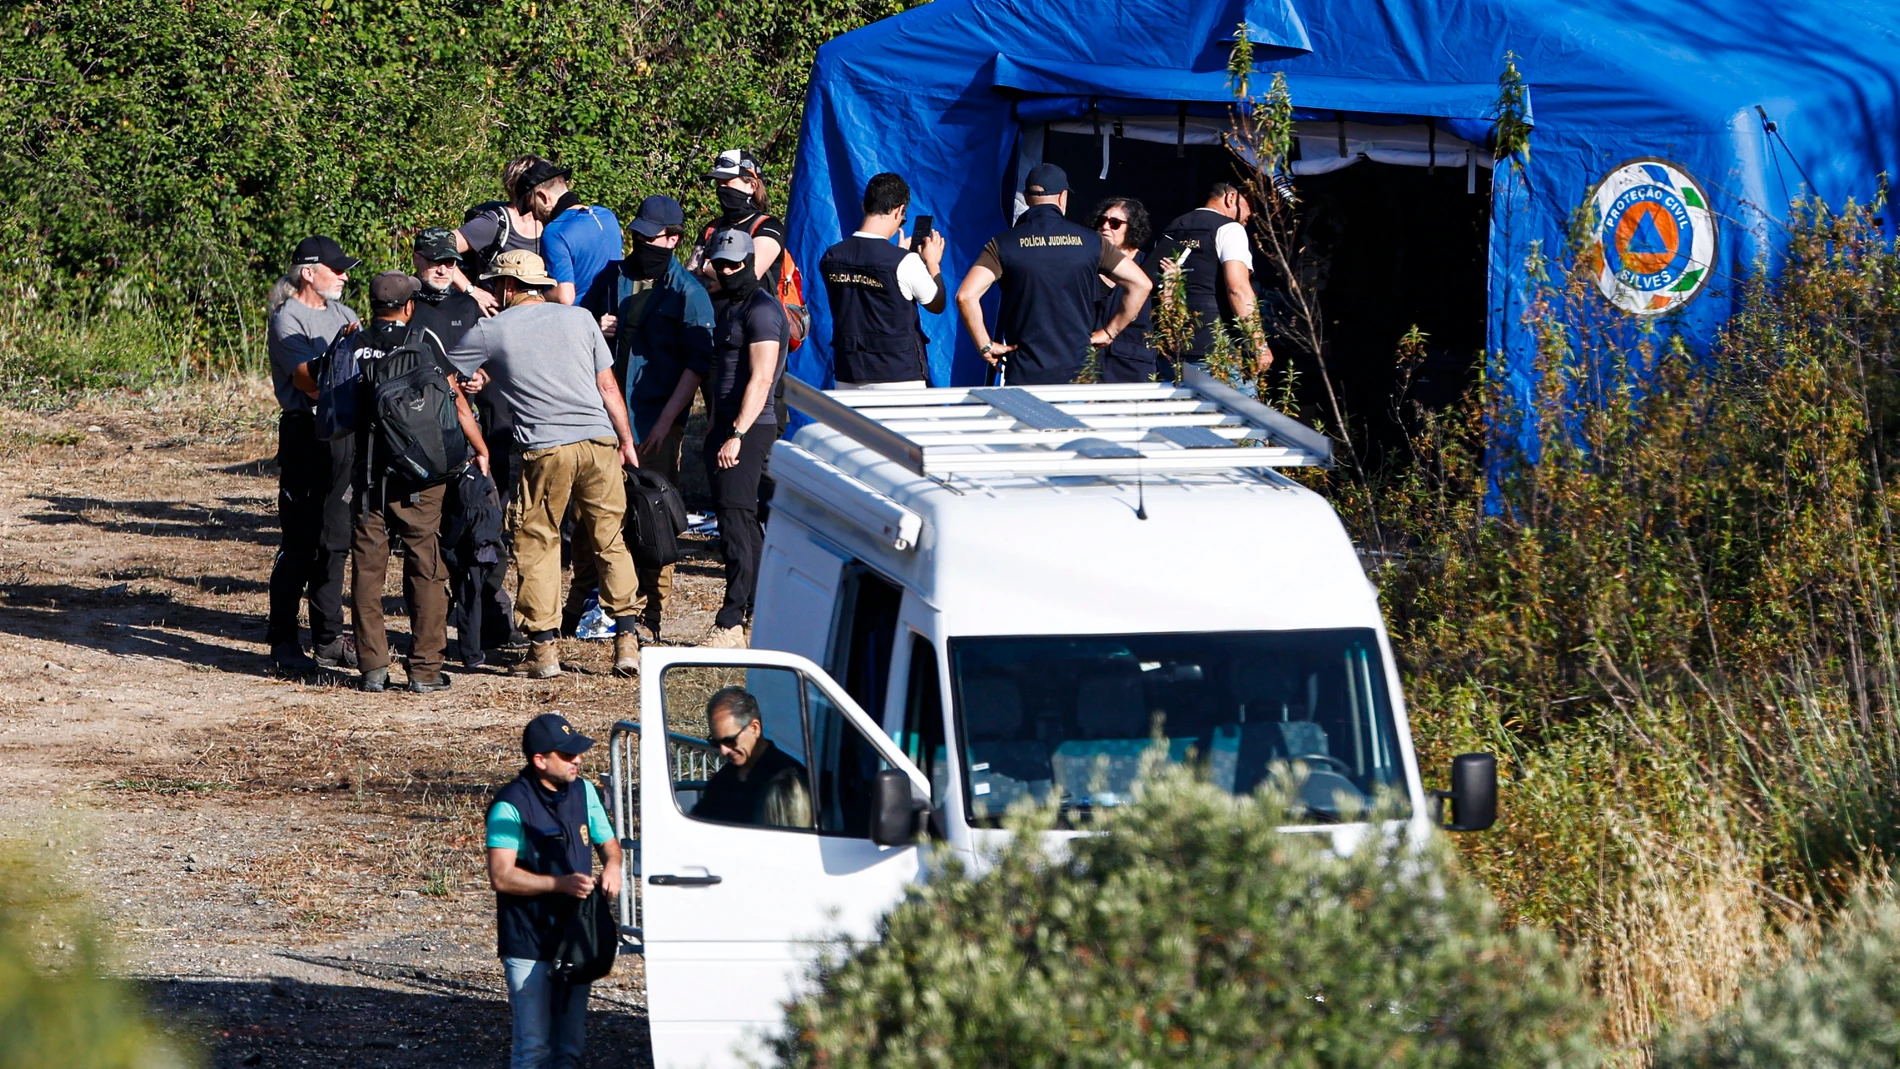 Silves (Portugal), 25/05/2023.- Authorities gather at a Judiciary Police (PJ) makeshift base camp in the Arade dam area, Faro district, during the new search operation amid the investigation into the disappearance of Madeleine McCann, in Silves, Portugal, 25 May 2023. The operation, which began on 23 May, stems from a European Investigation Order addressed by the German authorities to Portugal and focuses on the Arade dam, located about 50 kilometers from Praia da Luz, where the child disappeared on 03 May 2007 while on vacation with her parents. EFE/EPA/LUIS FORRA
